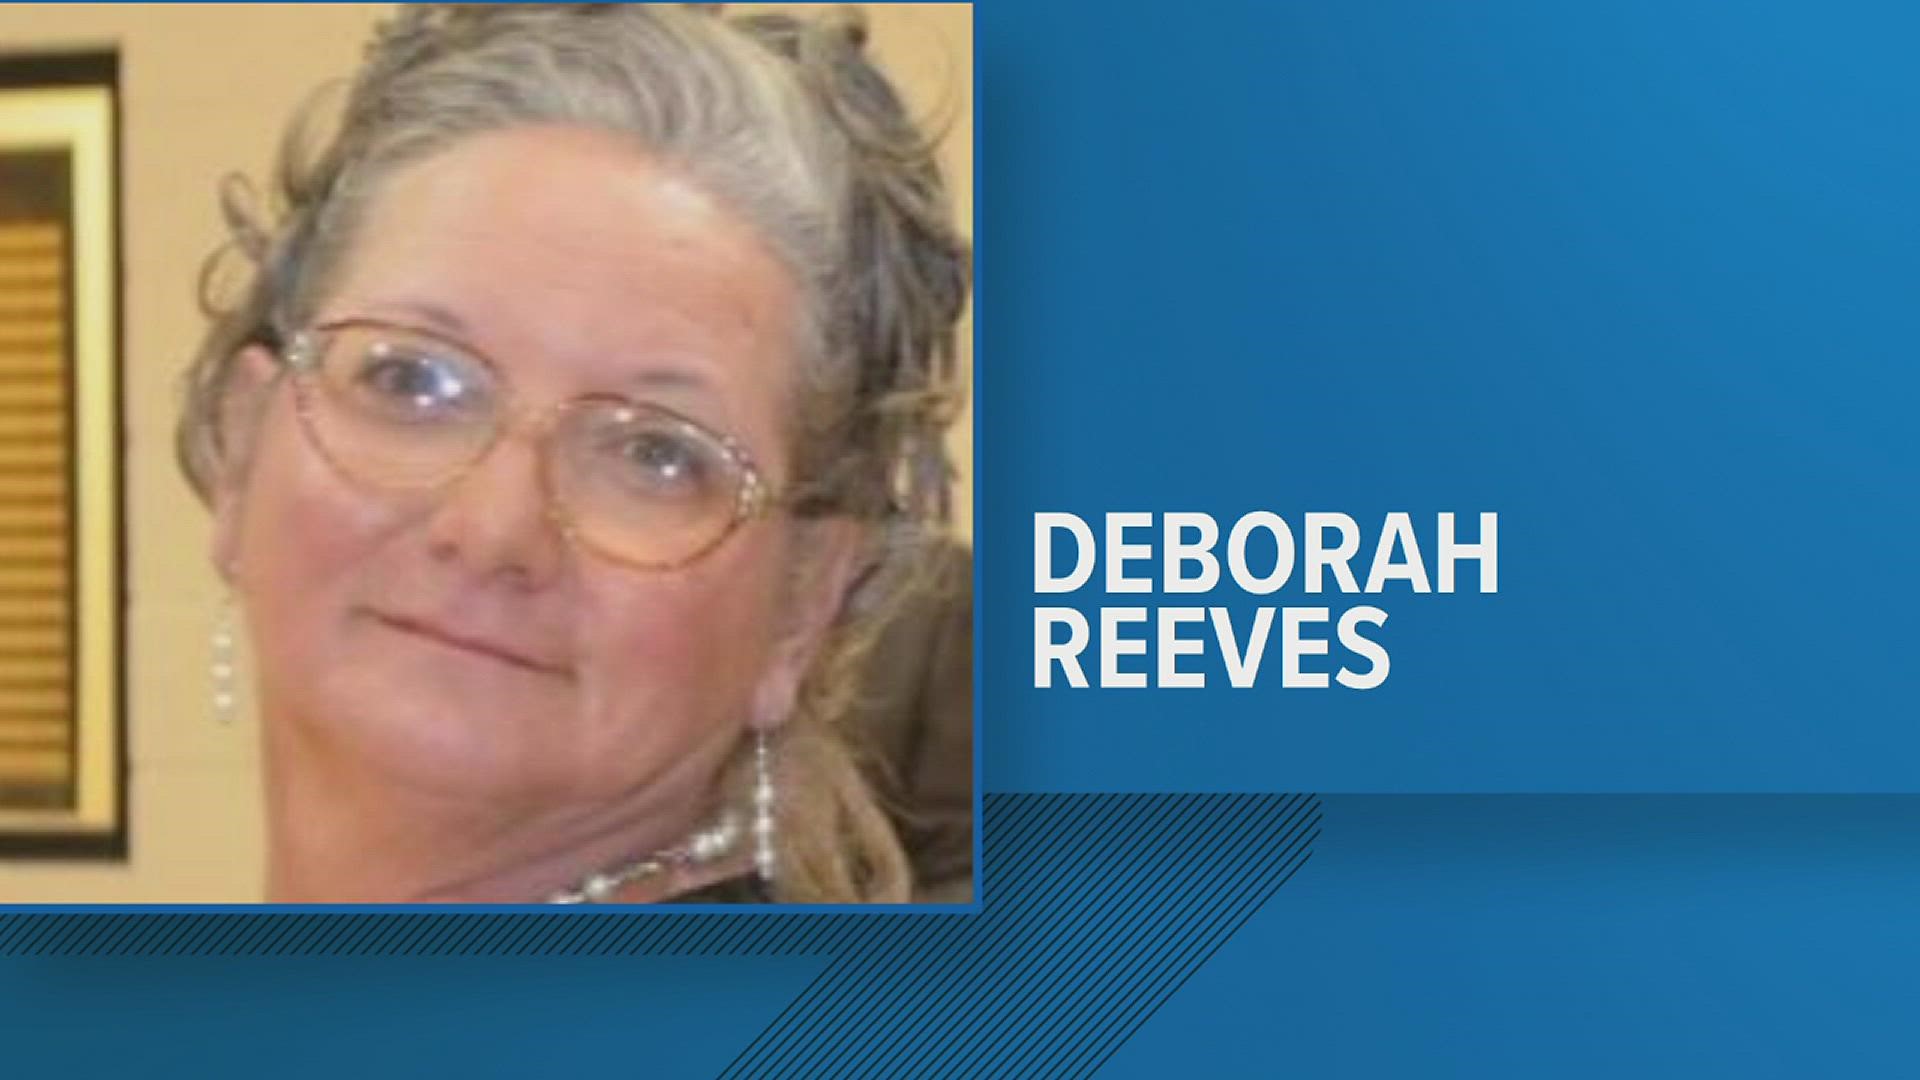 "Thank you Deborah for keeping our children safe. Rest in Peace."